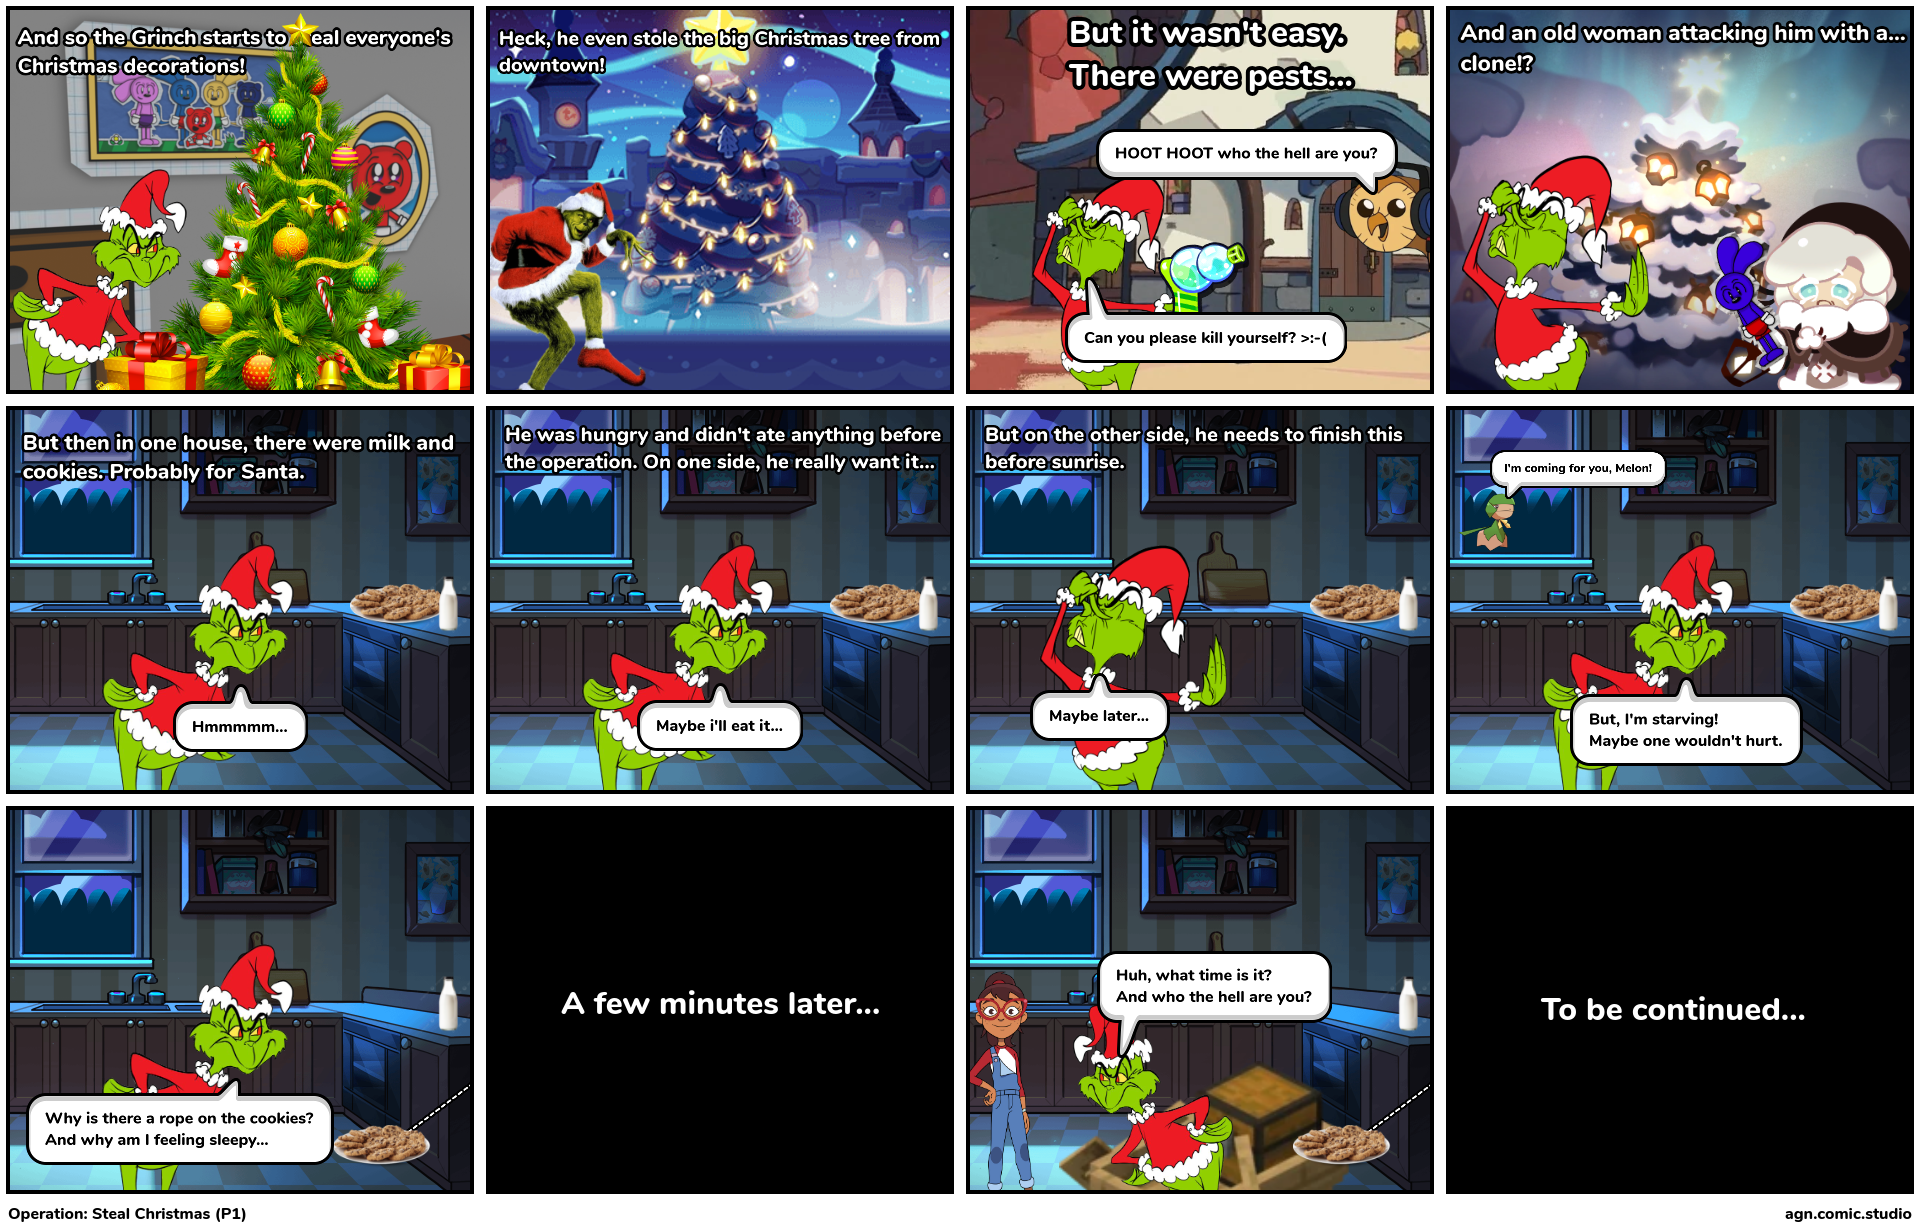 Operation: Steal Christmas (P1)